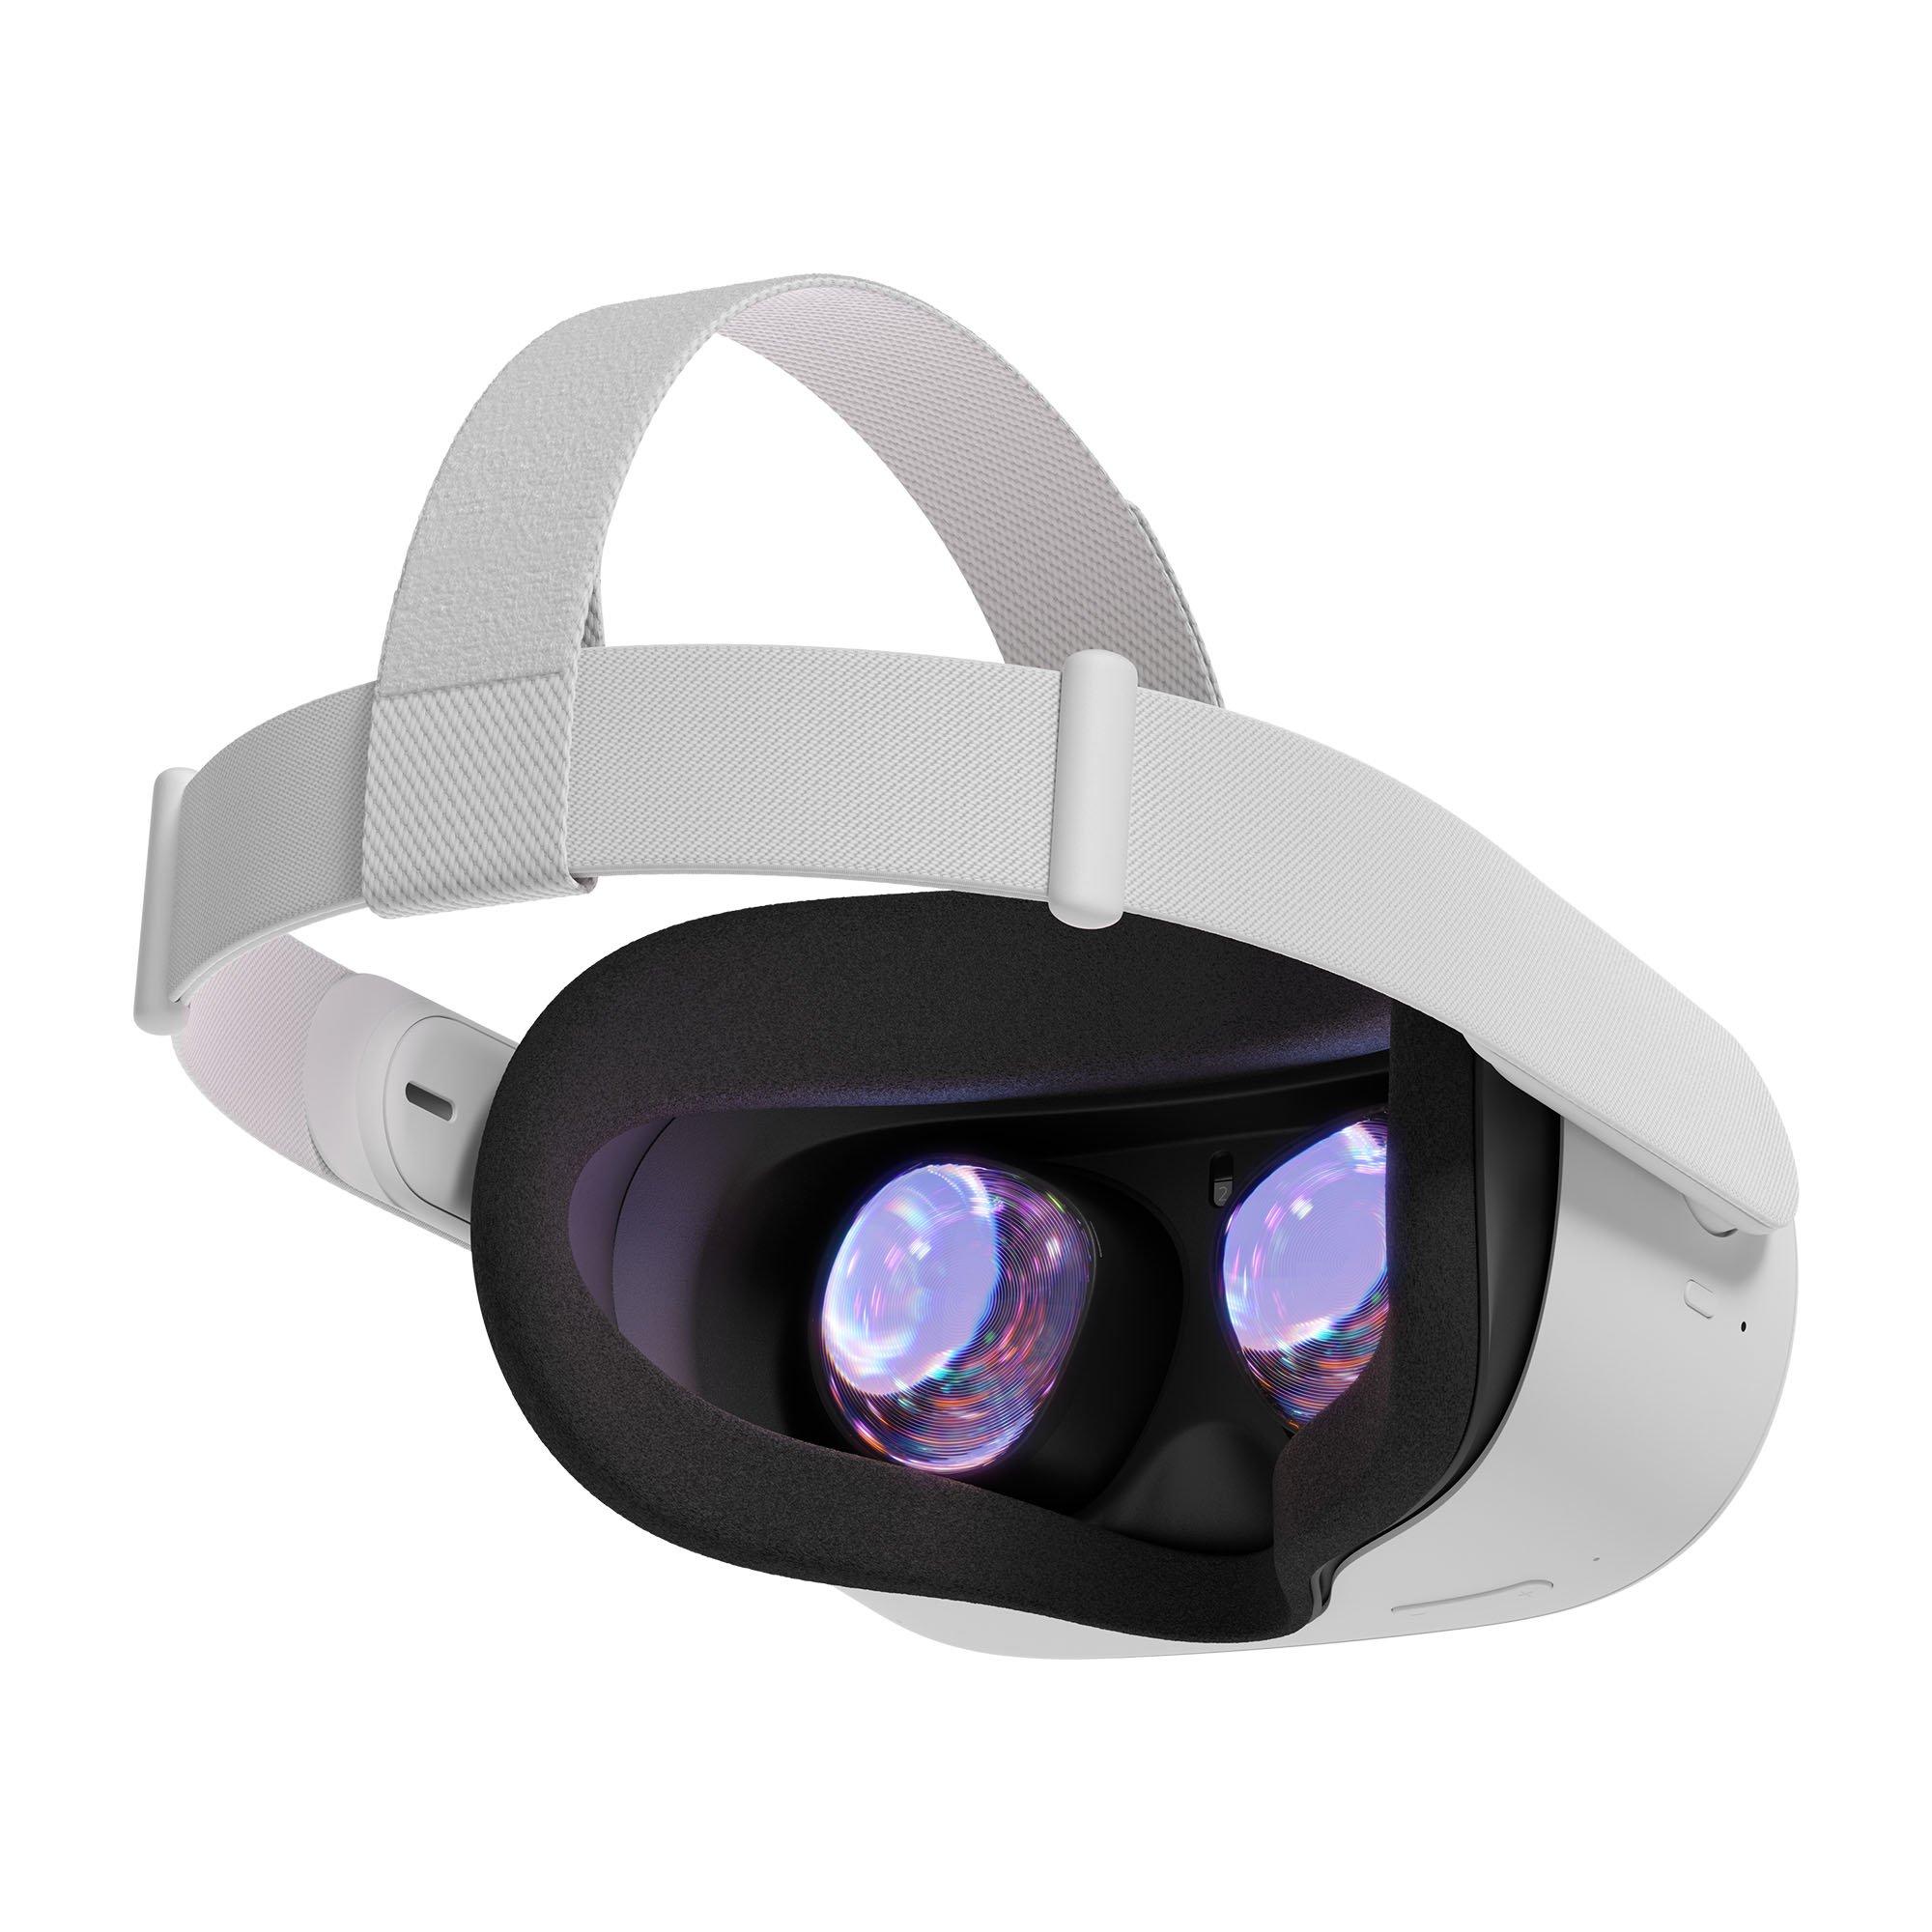 Meta Quest 2 Revisited: For Its Price, Still the Best VR Headset - CNET